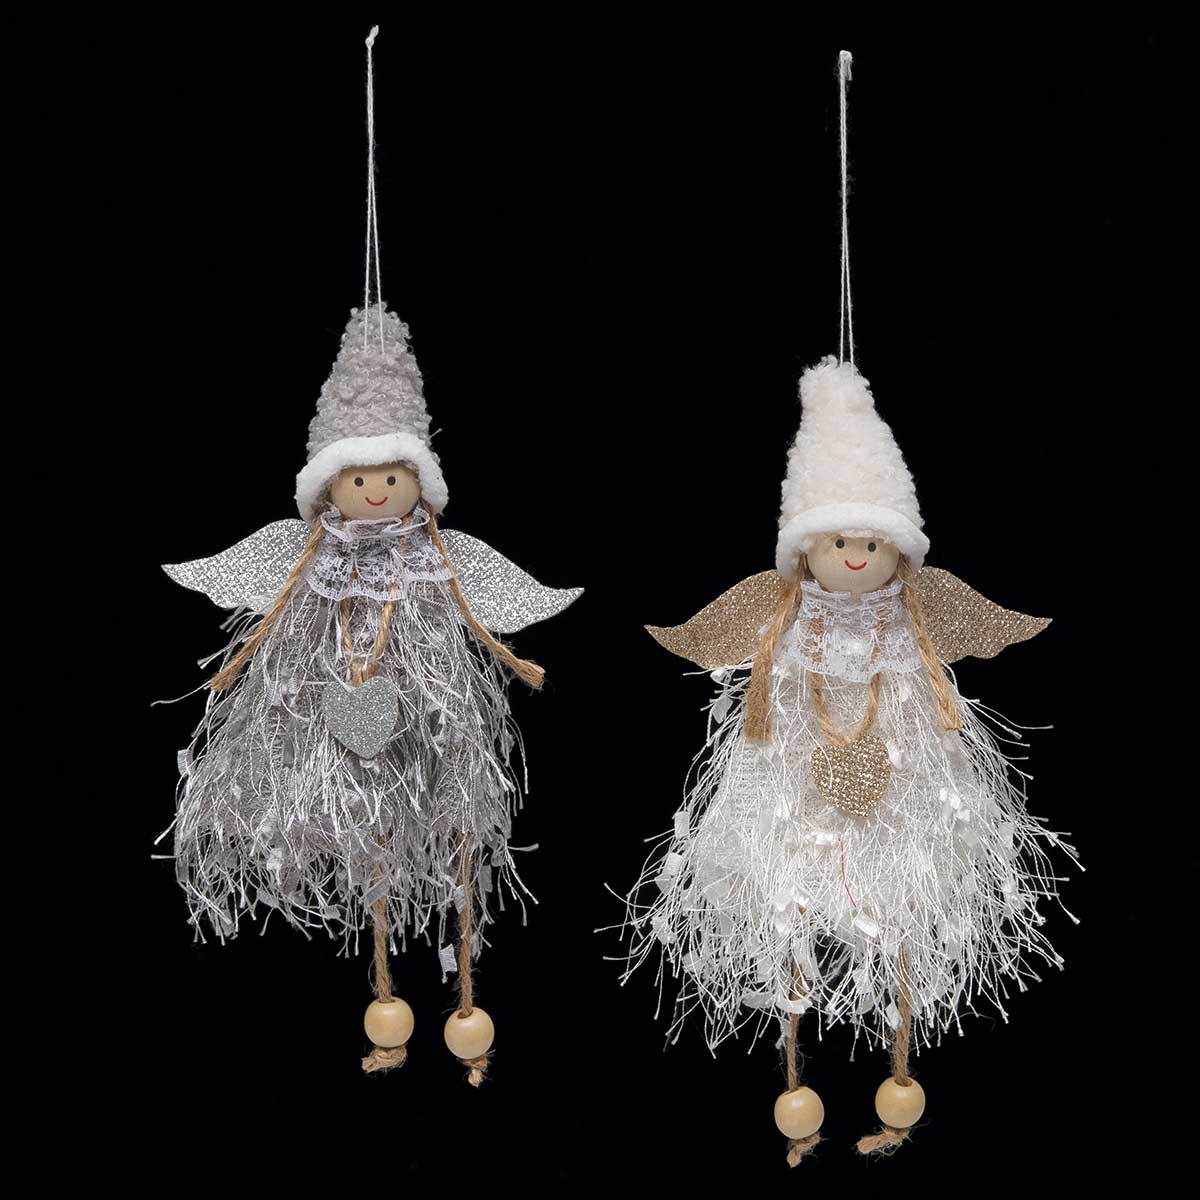 ORN ANGEL WITH ROPE LEGS 2 ASSORTED 4.25IN X 1.25IN X 8.5